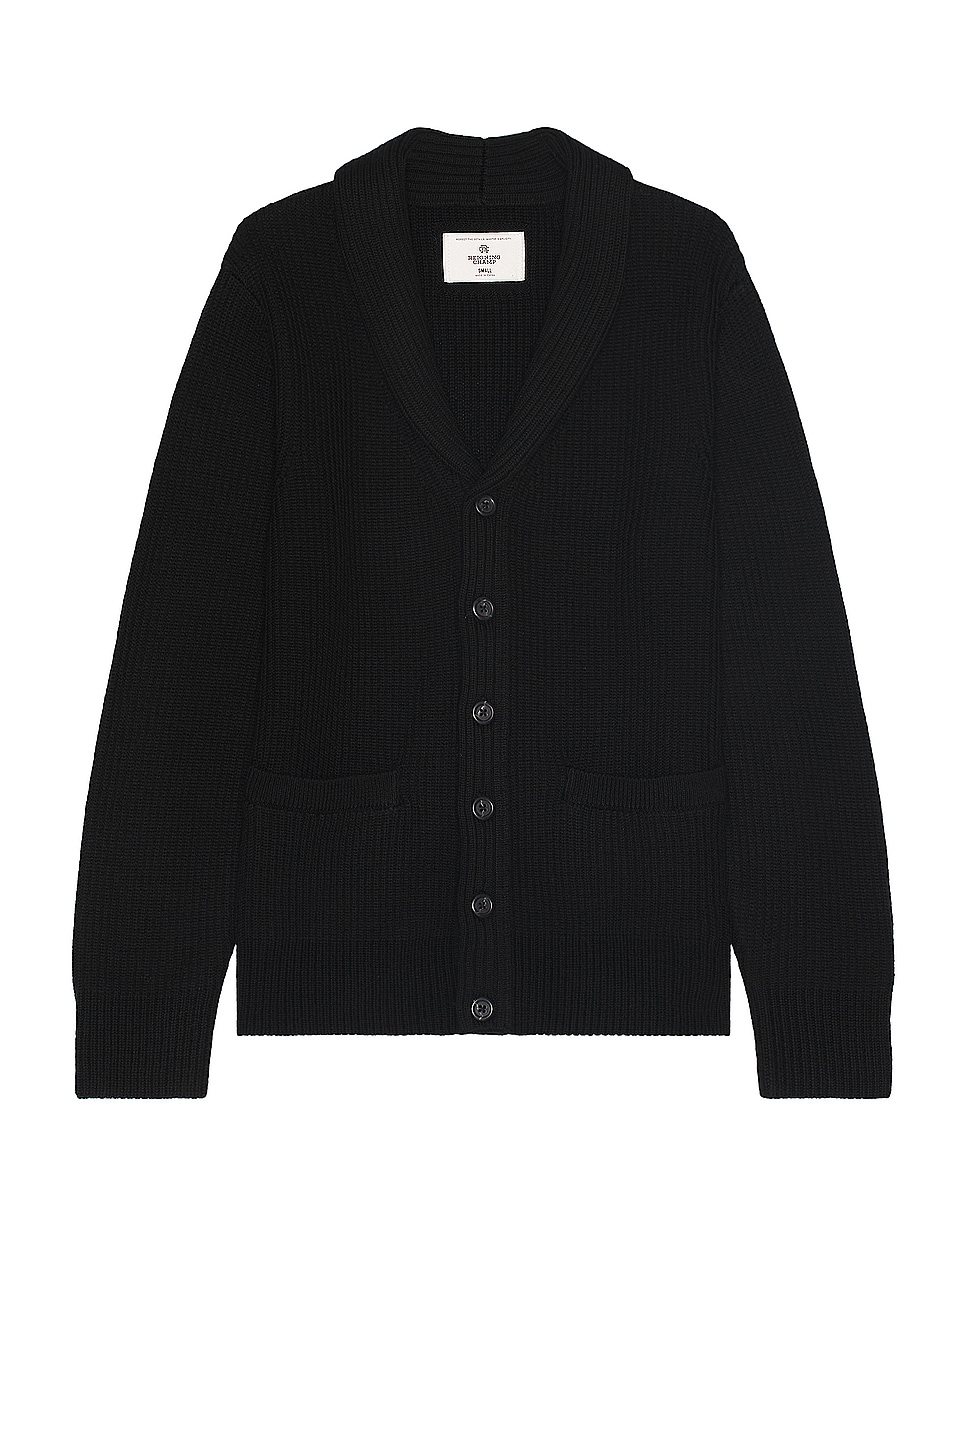 Image 1 of Reigning Champ Vinnie Cardigan in Black